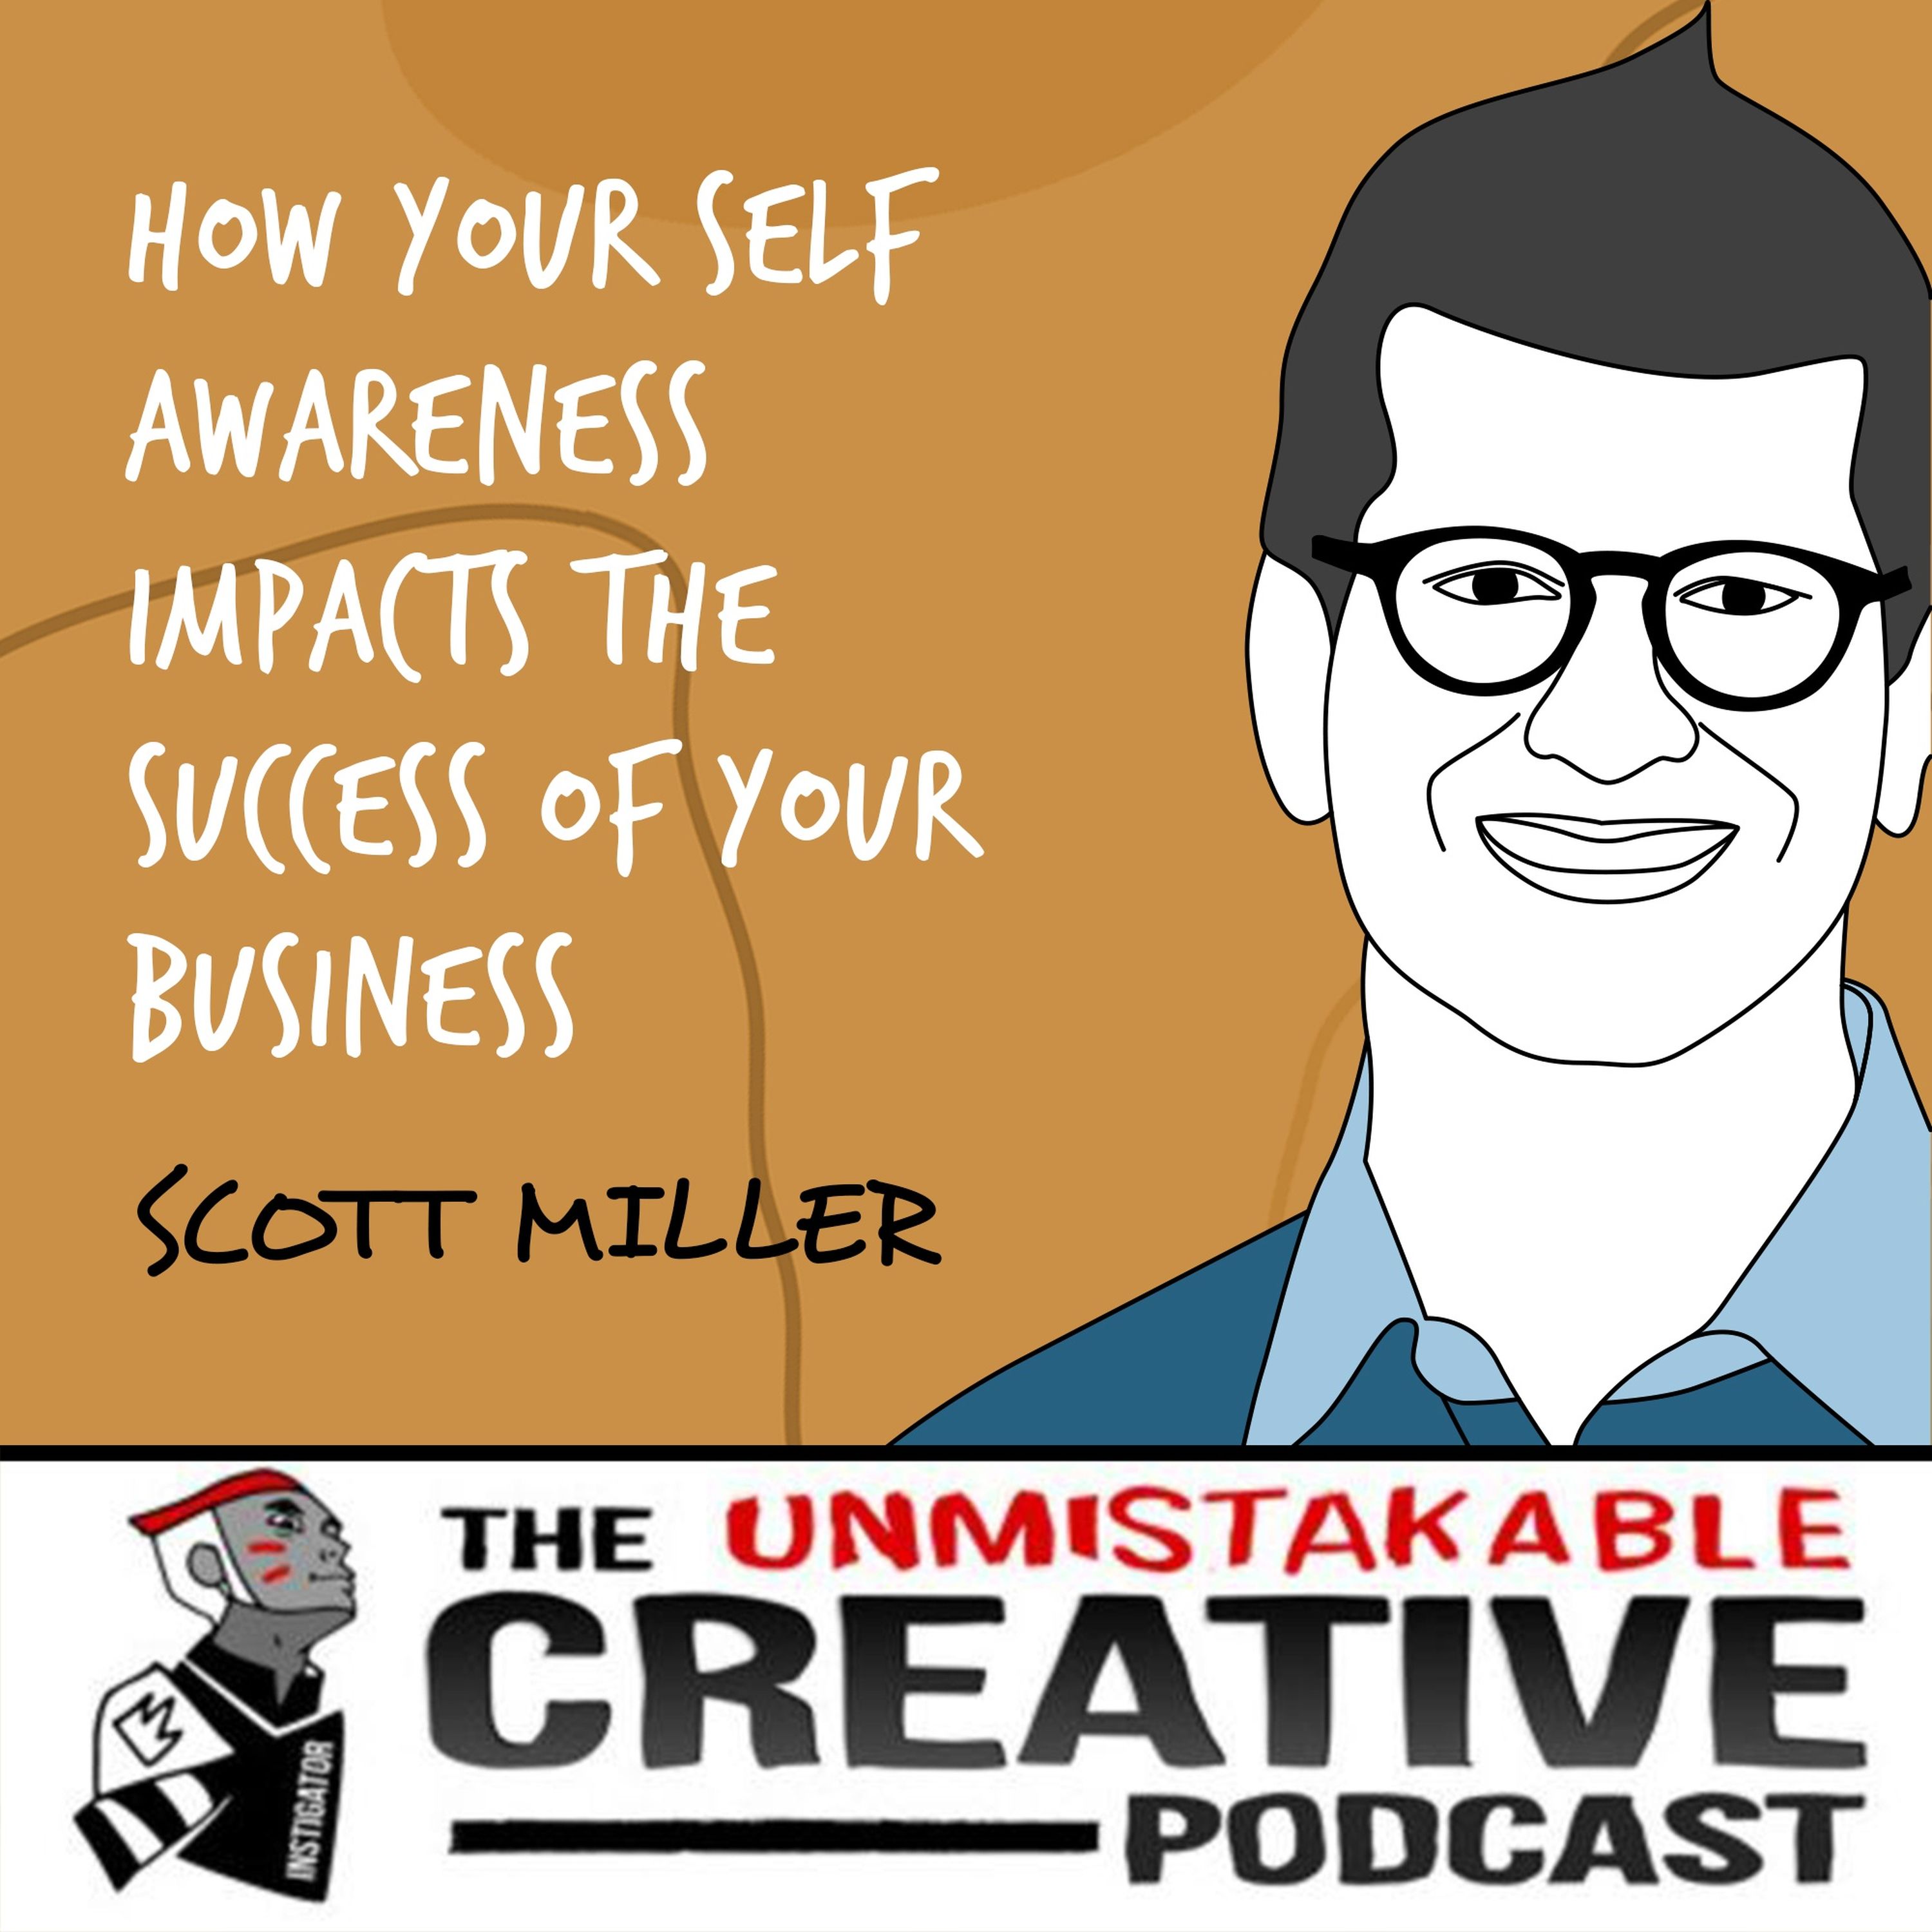 Scott Miller | How Your Self Awareness Impacts the Success of Your Business Image